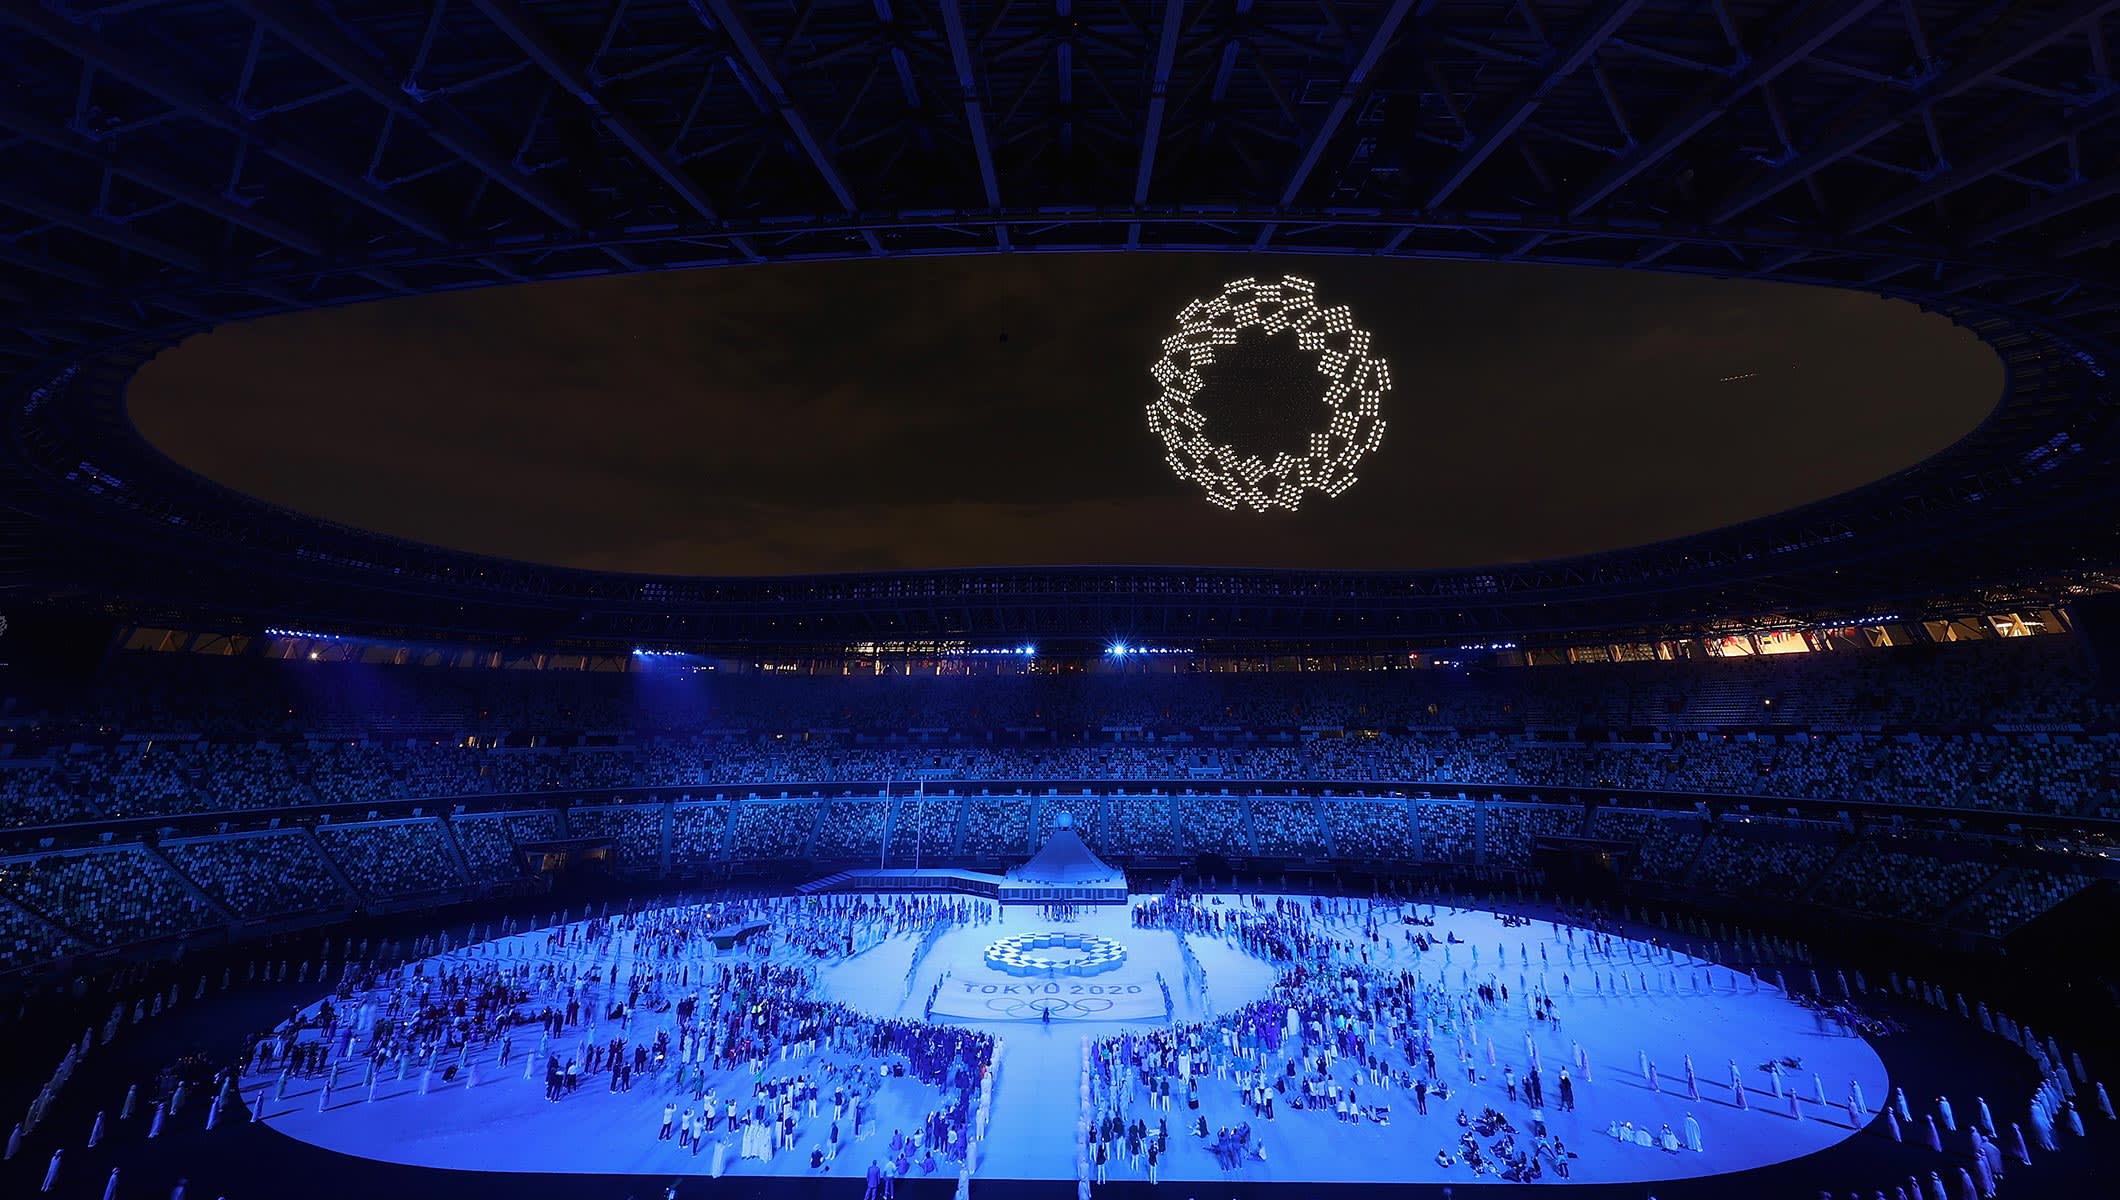 Intel drones light up the sky in Tokyo 2020 opening ceremony